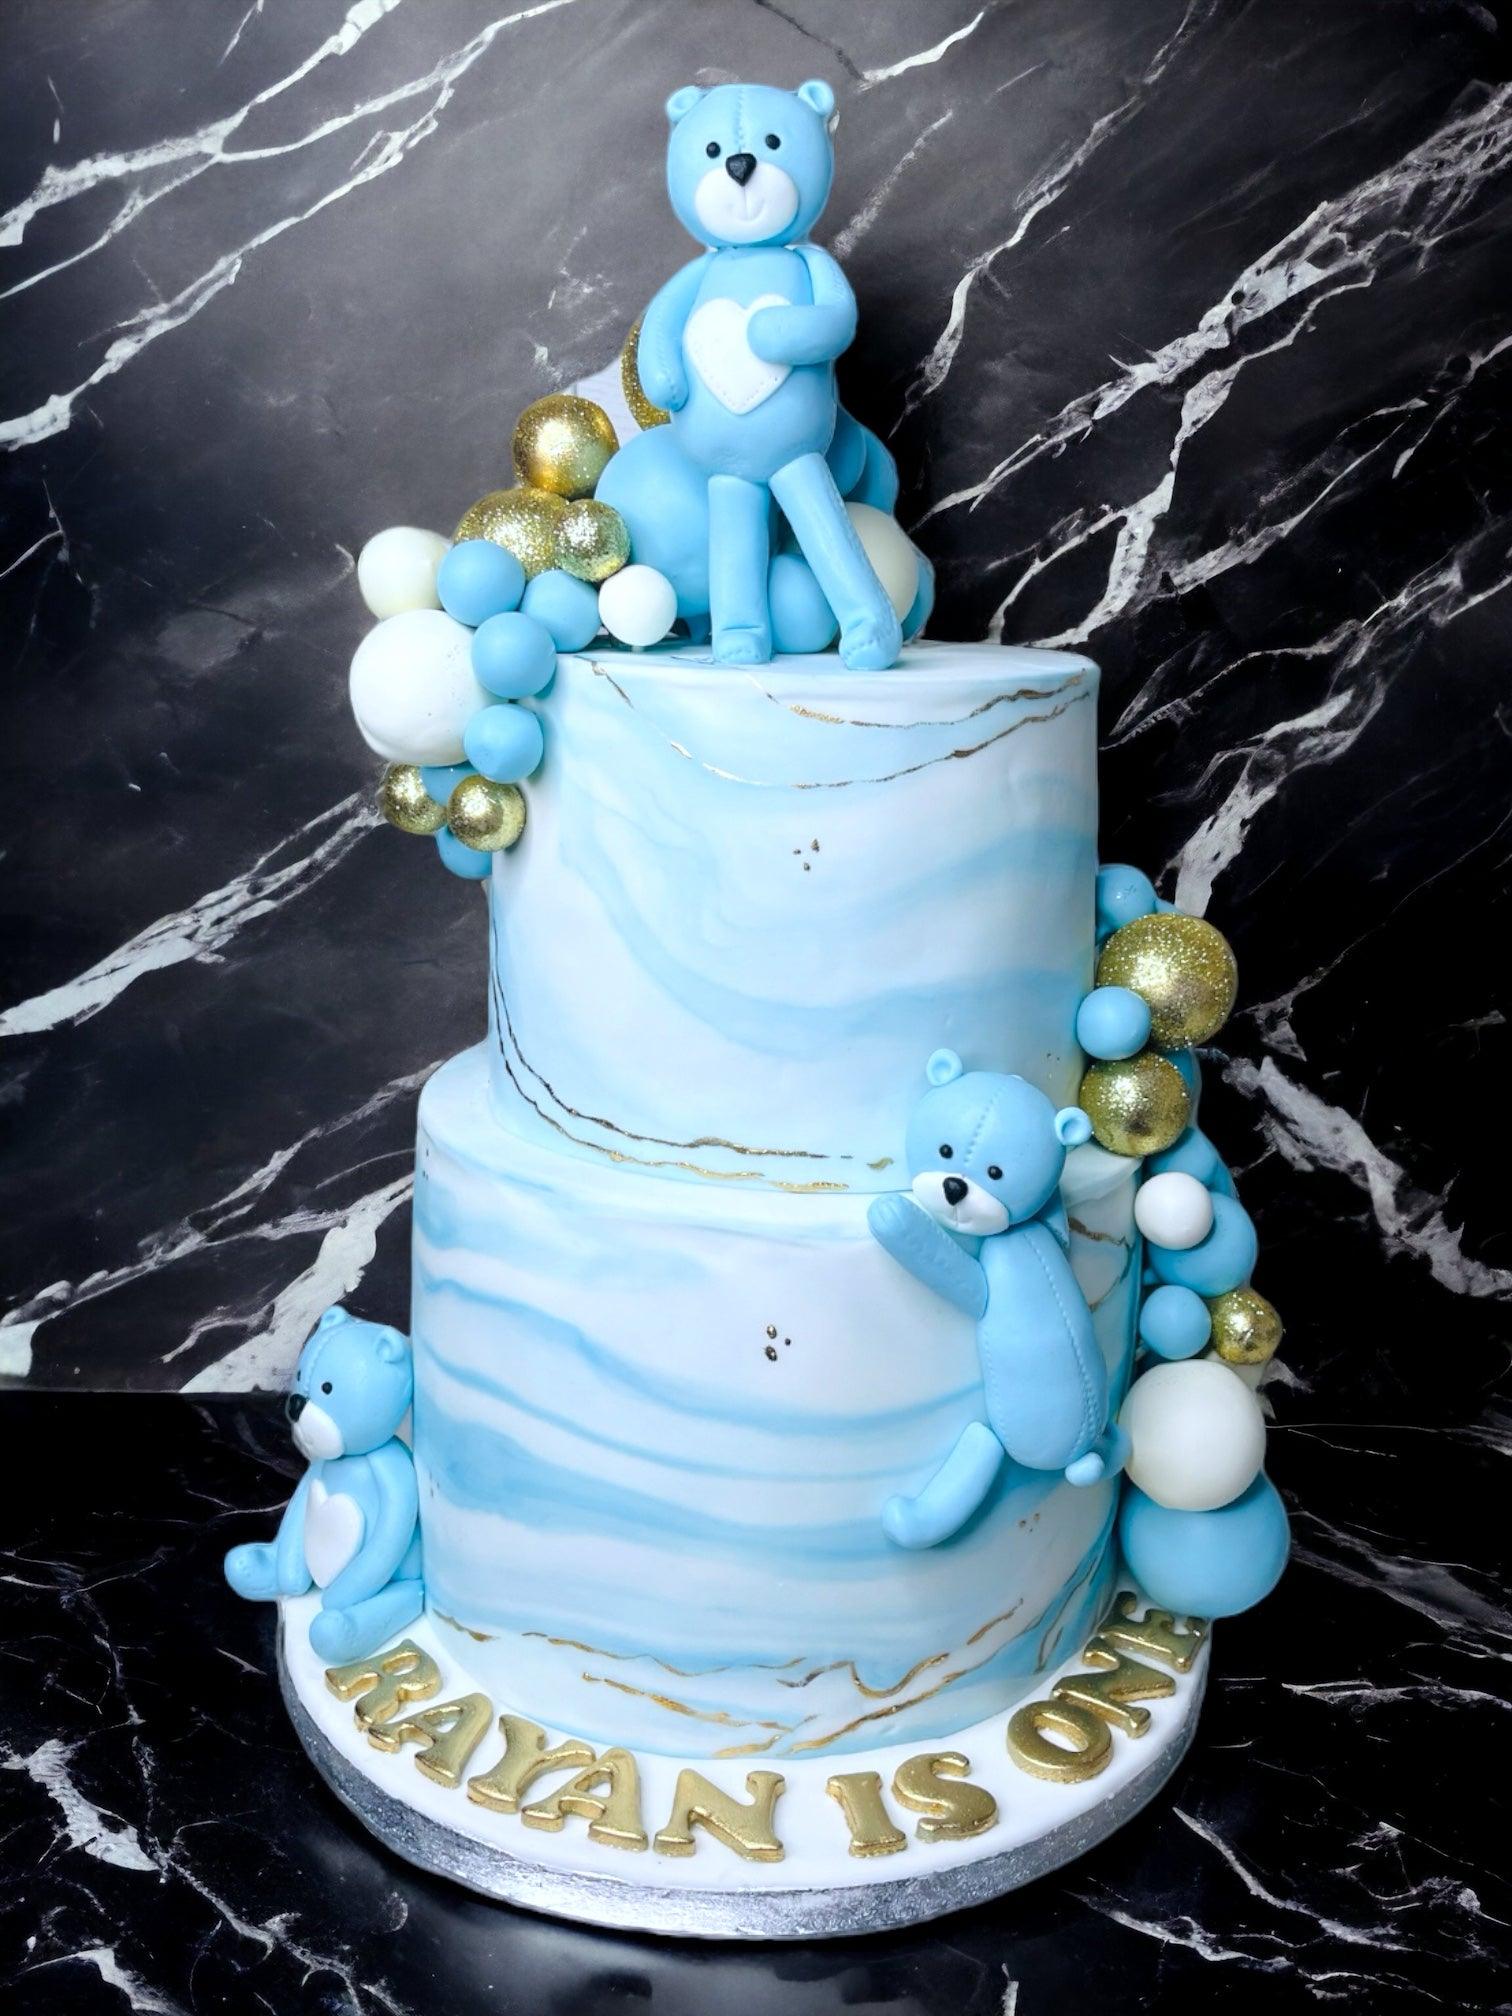 Teddy bears and balls cake - Naturally_deliciousss